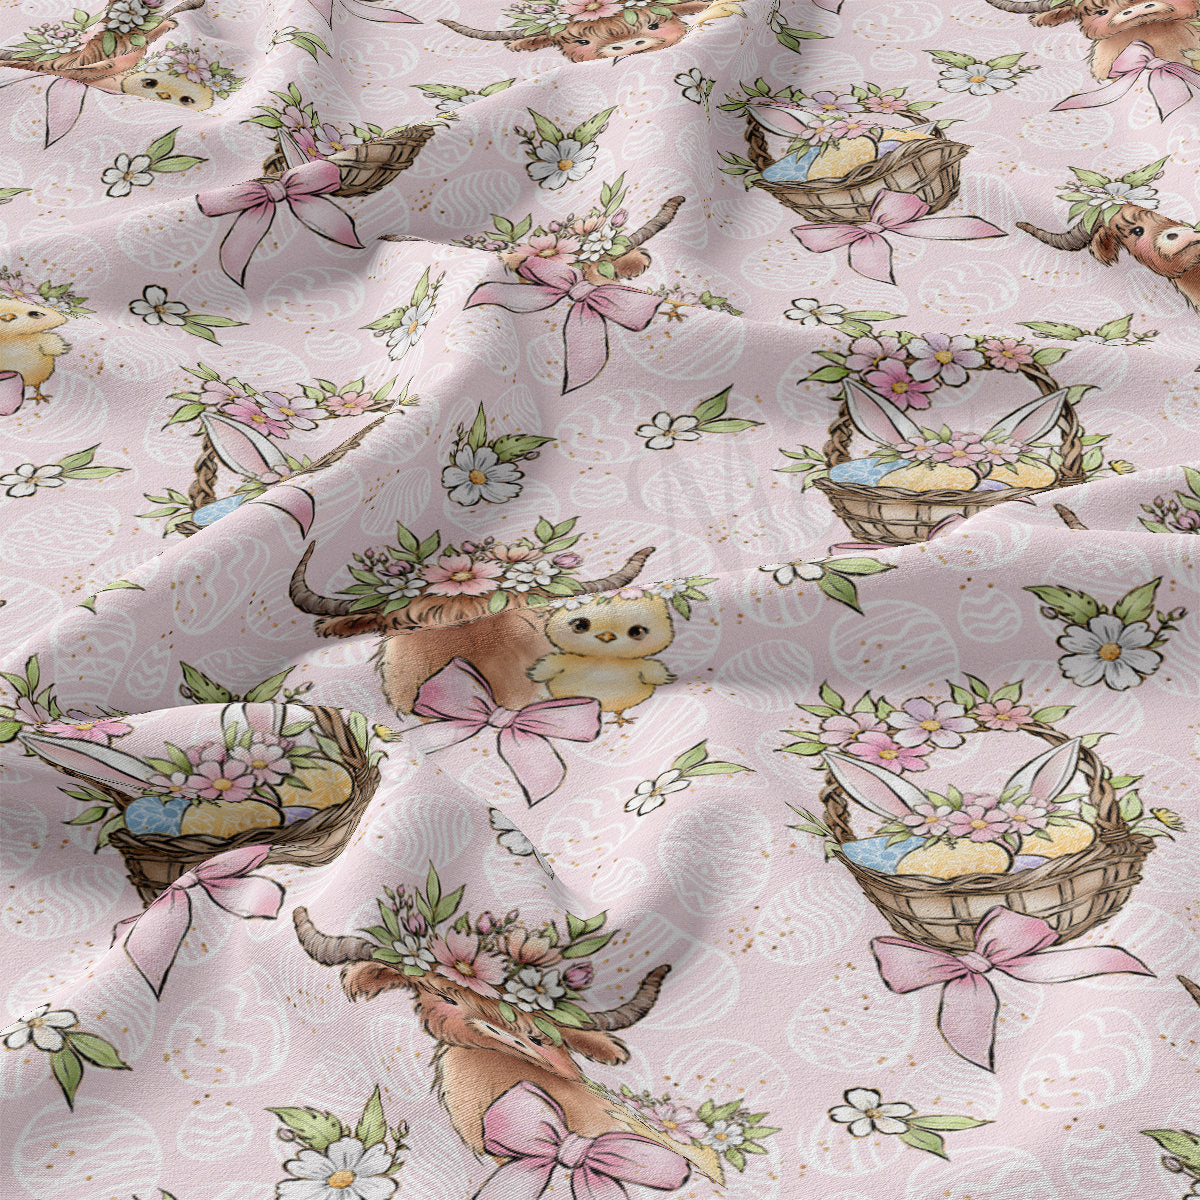 DBP Fabric Double Brushed Polyester DBP2625 Easter